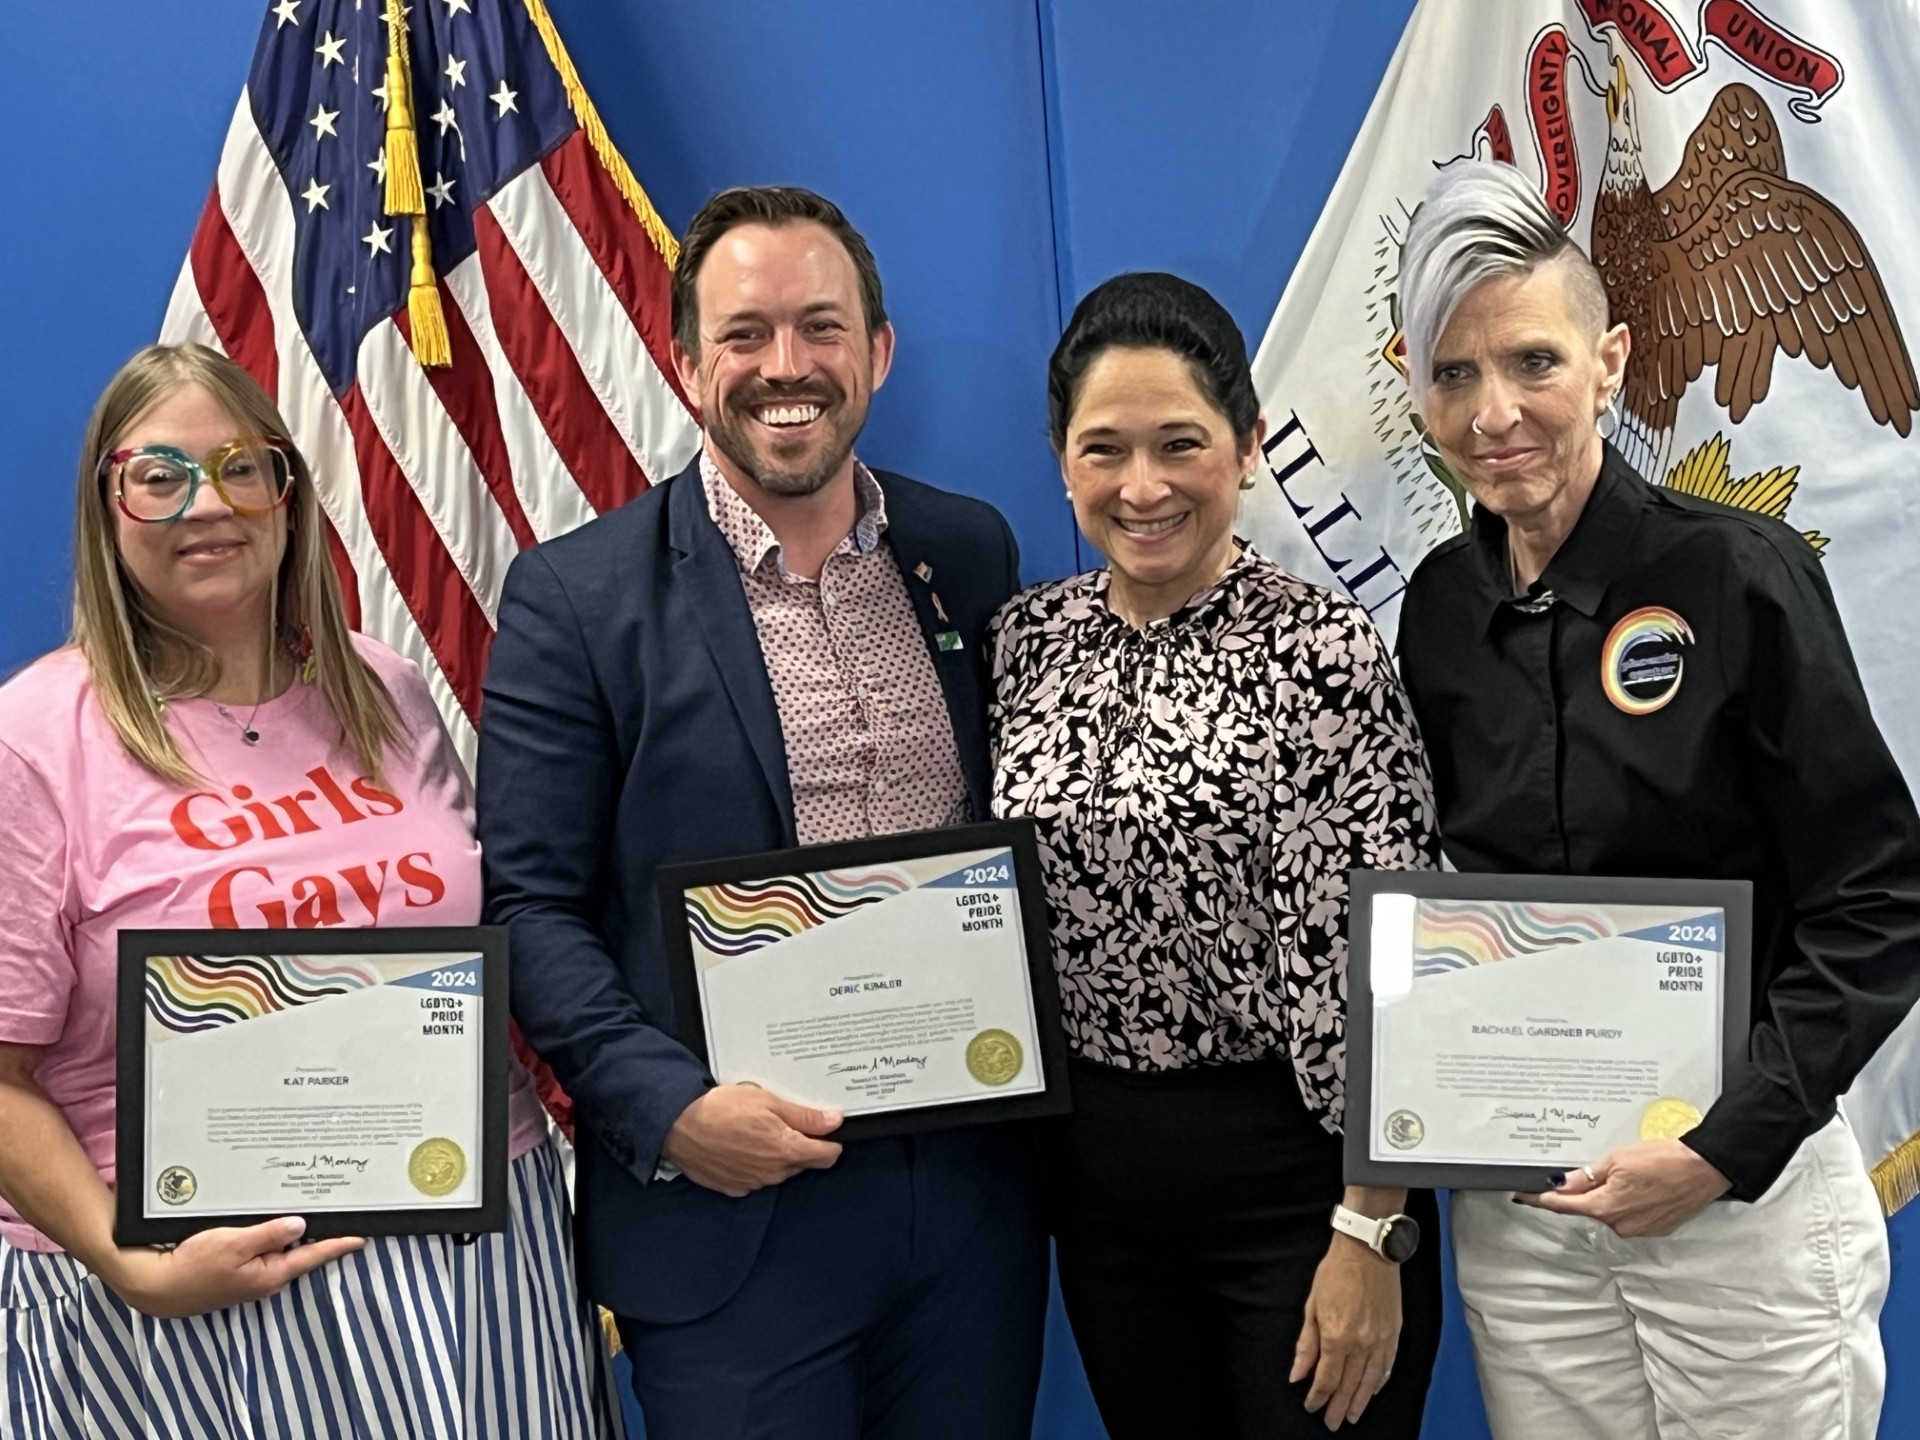 LGBTQ leaders from central Illinois honored by Illinois Comptroller Mendoza